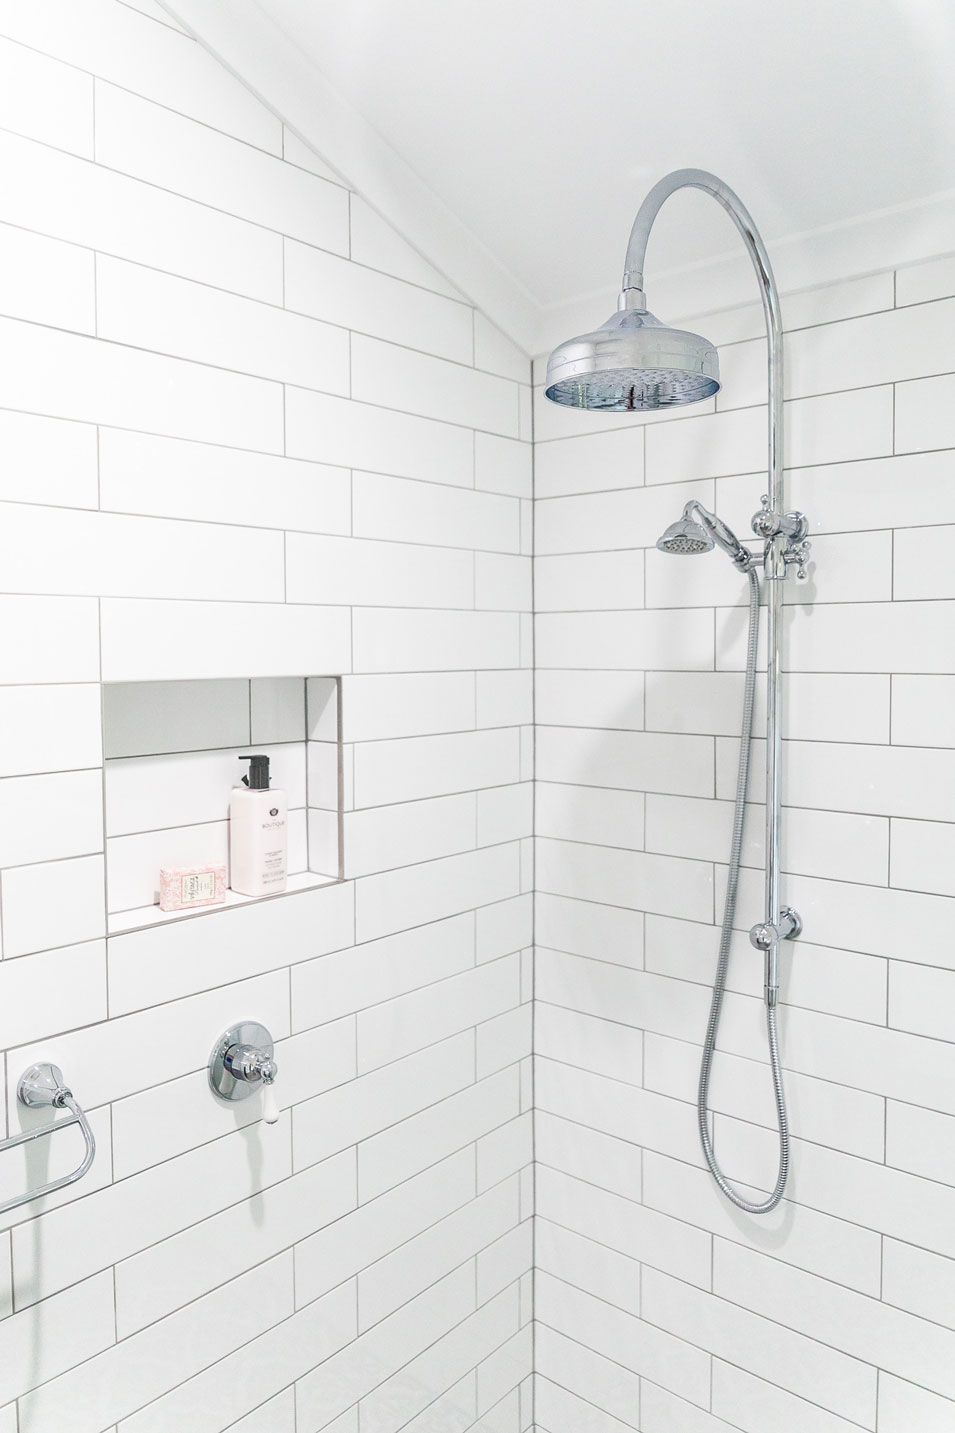 Fienza Lillian shower set in Chrome is a stand out feature in the traditional shower space. Complete with white subway wall tiles with light grey grout.